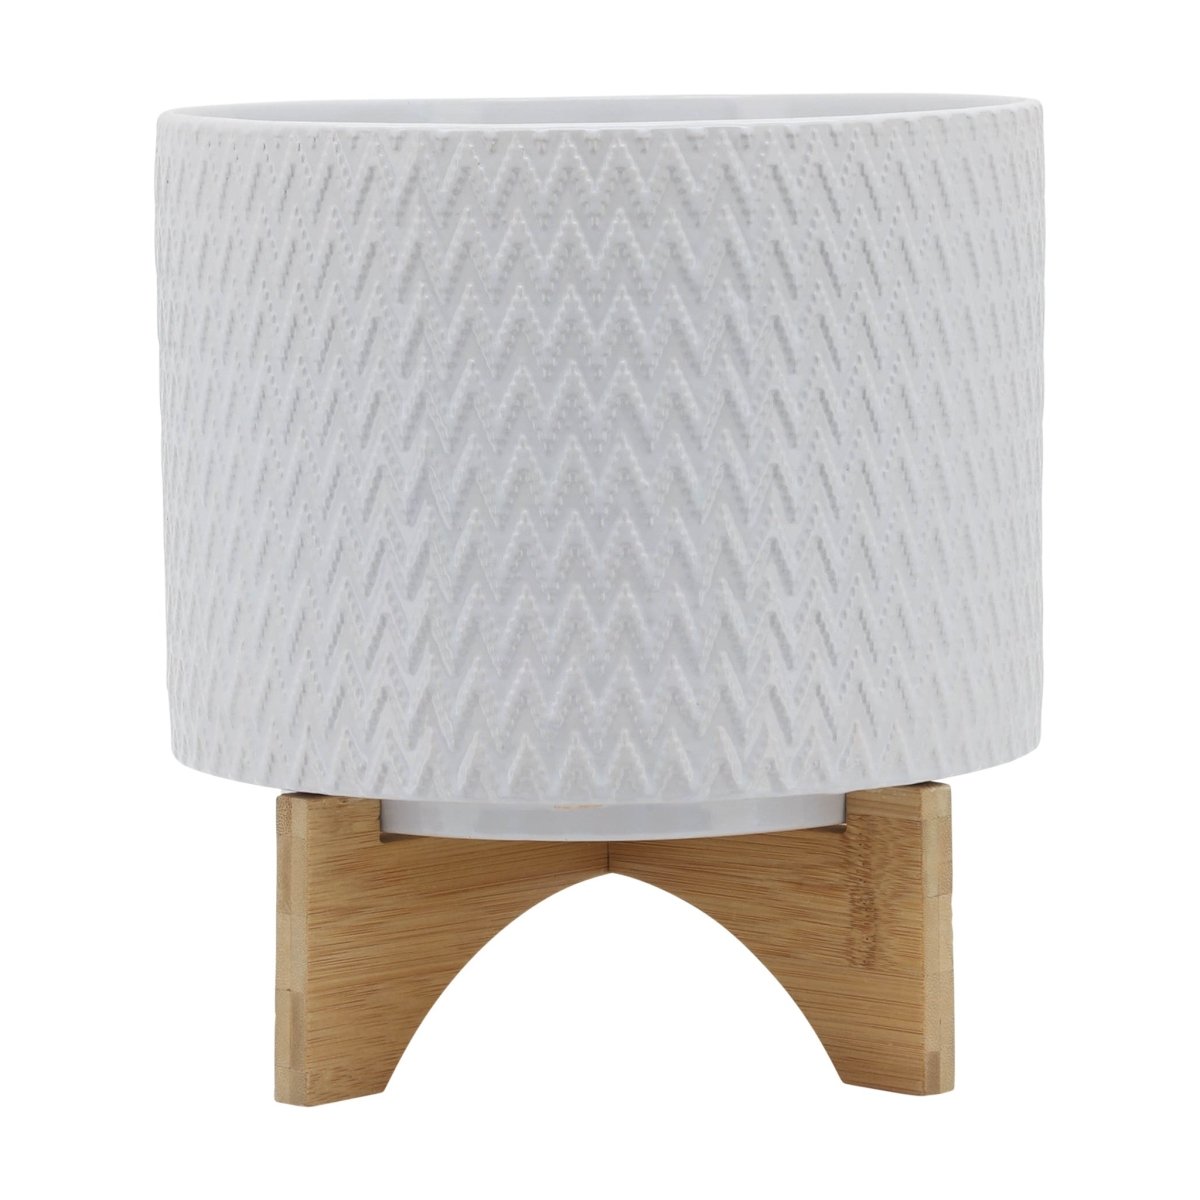 Sagebrook Home Ceramic Chevron Planter With Wood Stand, White - lily & onyx